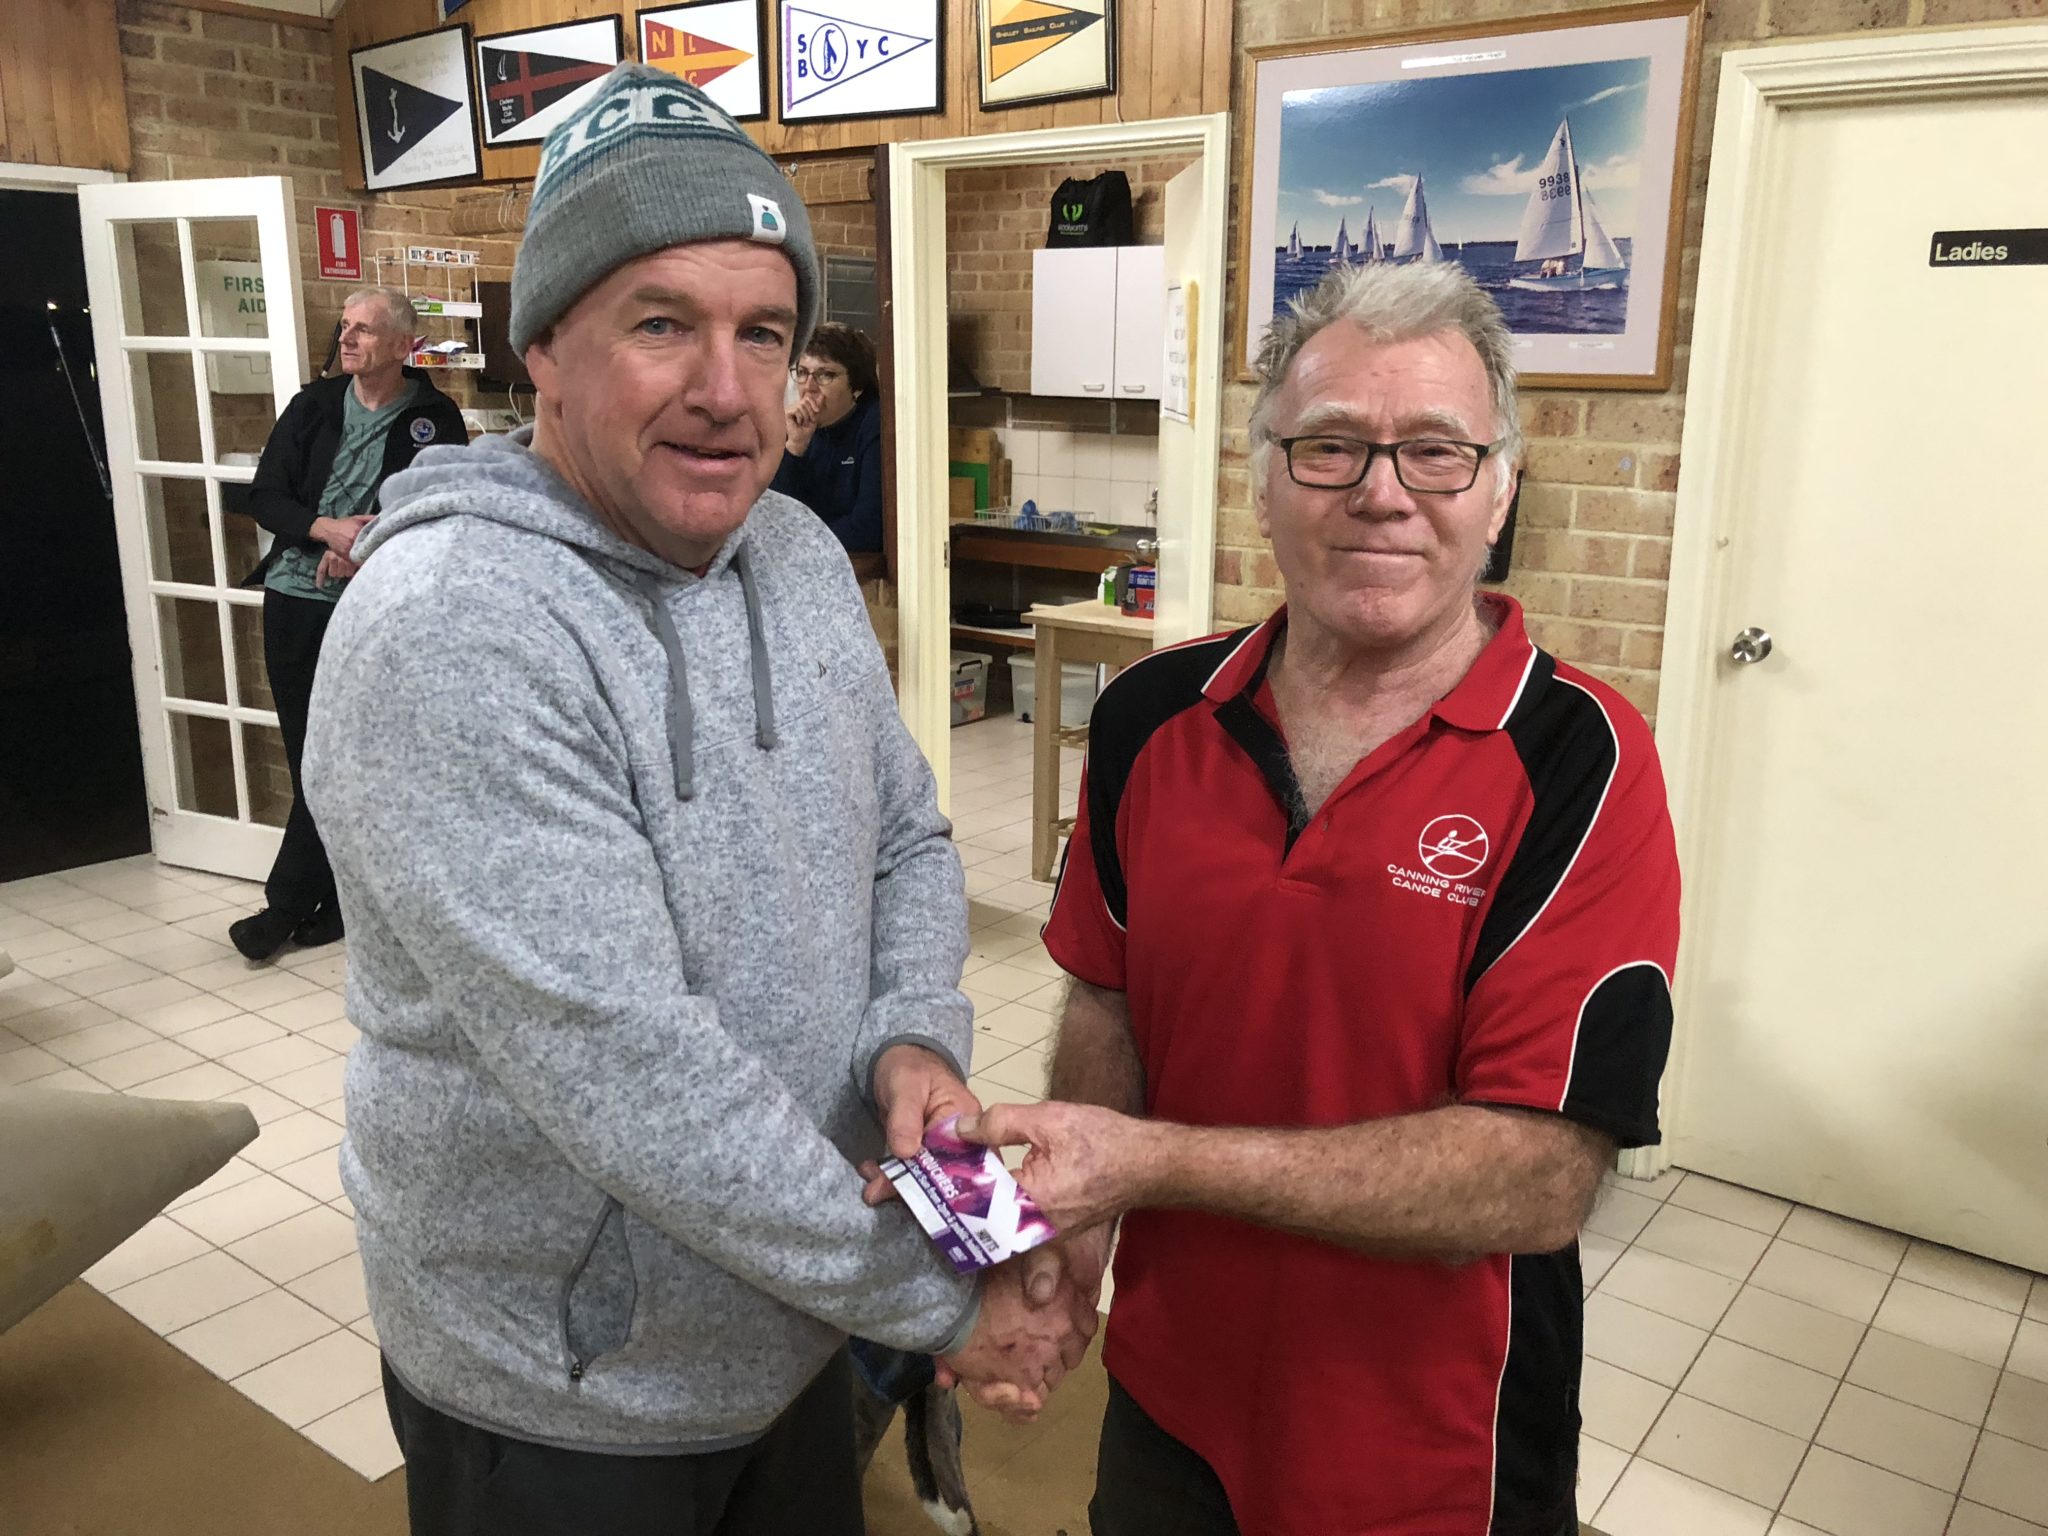 Tues 12th June 2018 : Tonight’s photo shows club member David Gardiner presenting Steve Mitchinson with a movie voucher.